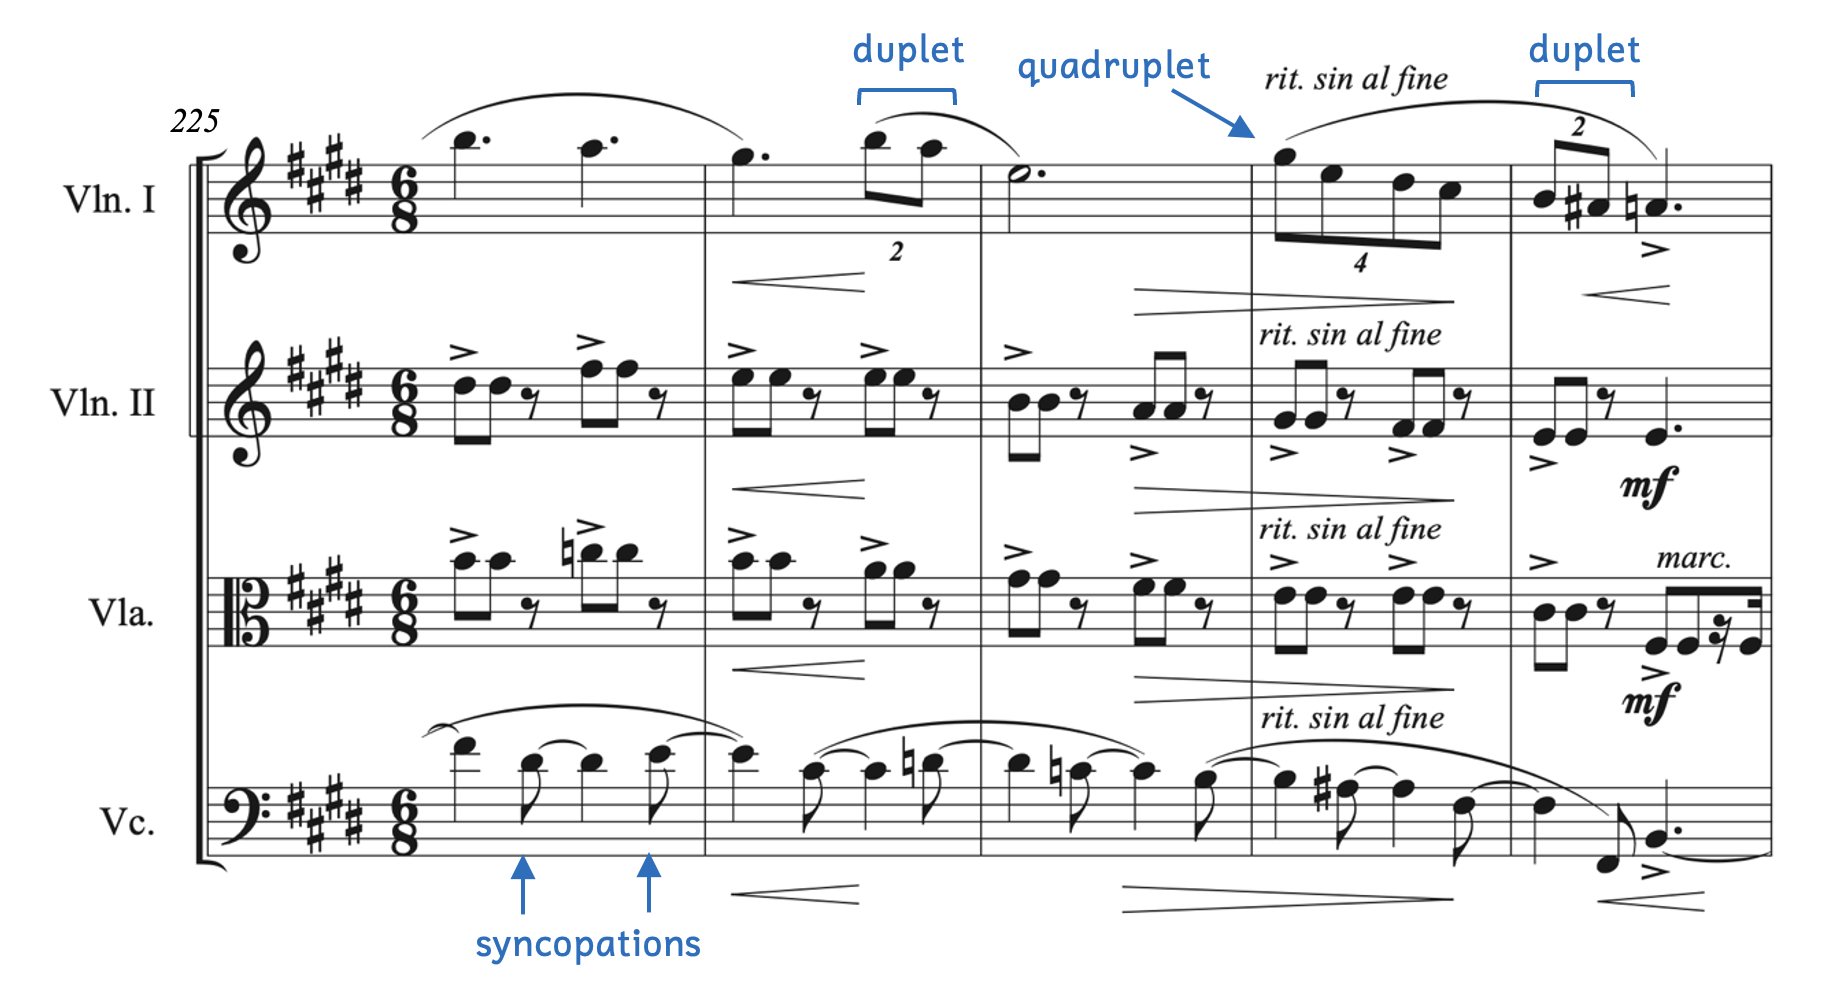 Examples of duplets and quadruplets in the first movement of Smyth's string quartet in E minor.